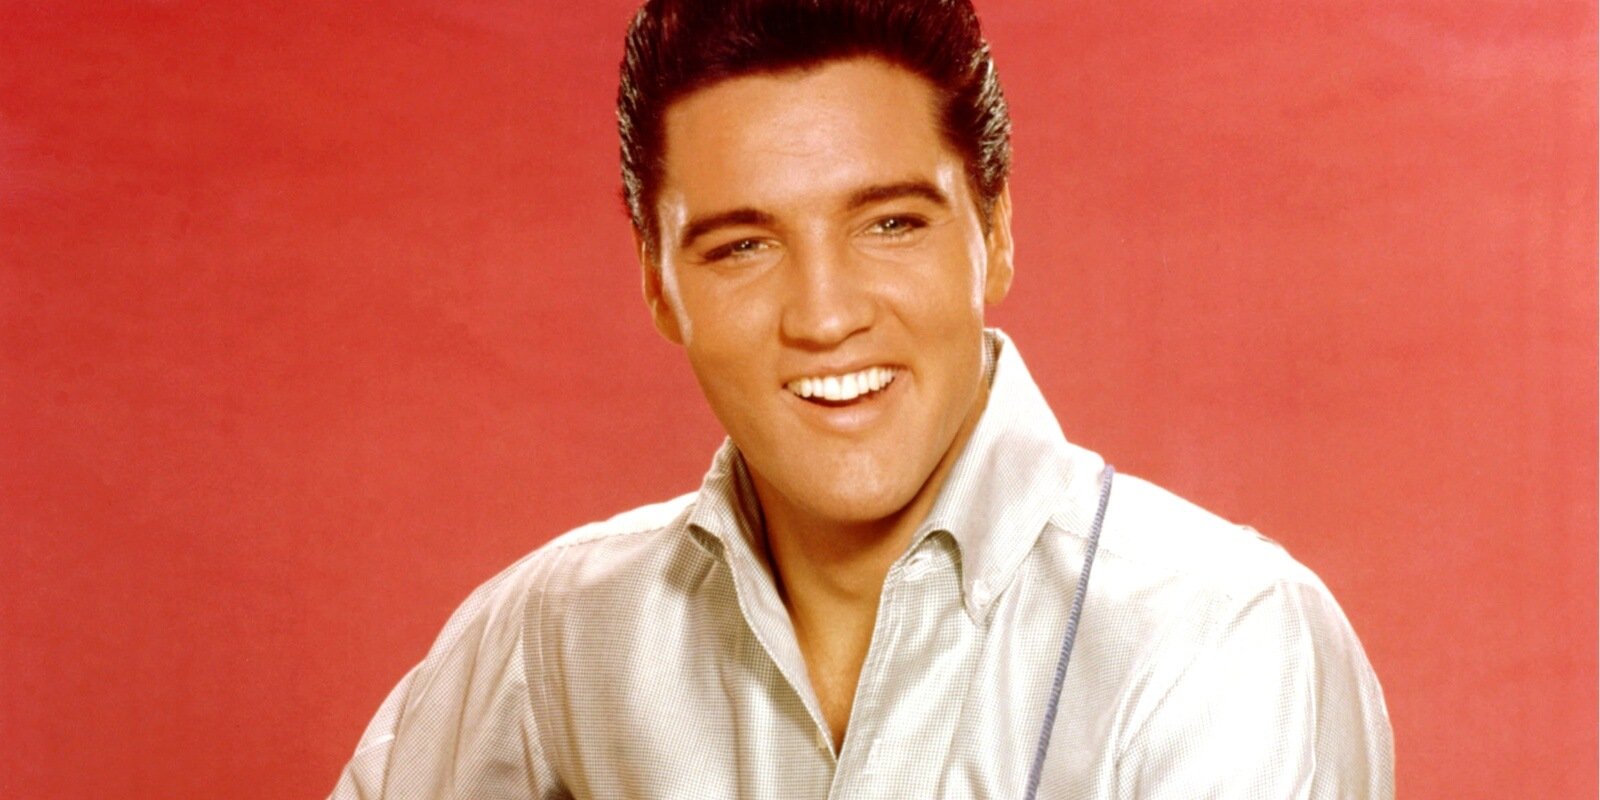 Elvis Presley photographed in eptember 1962 in Culver City, California at MGM Studios.